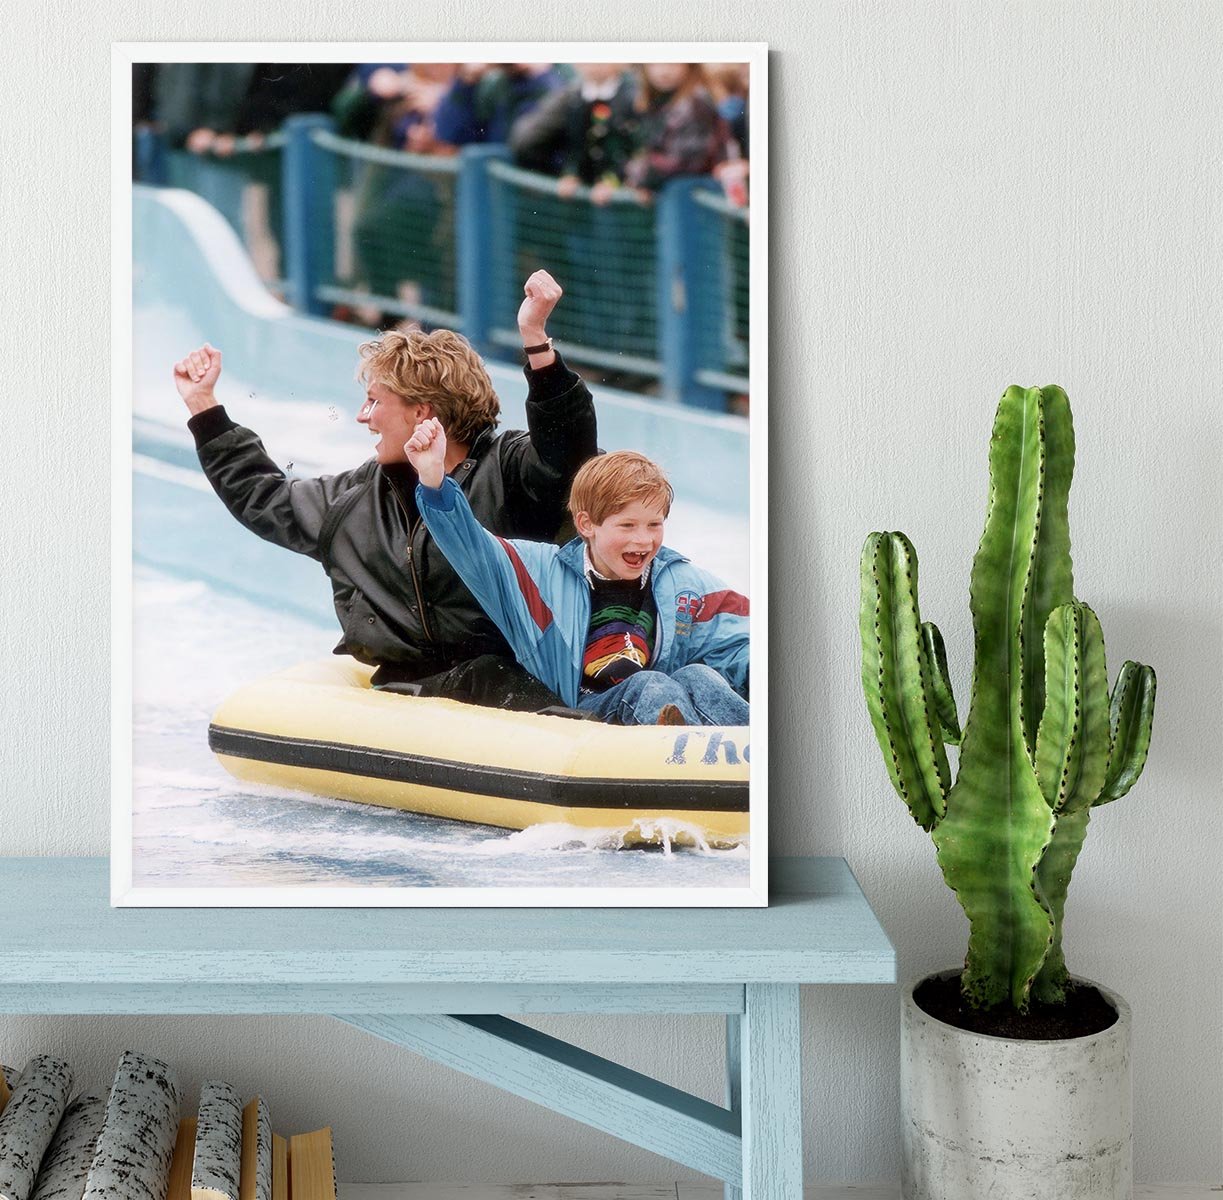 Princess Diana with Prince Harry on a water ride Framed Print - Canvas Art Rocks -6